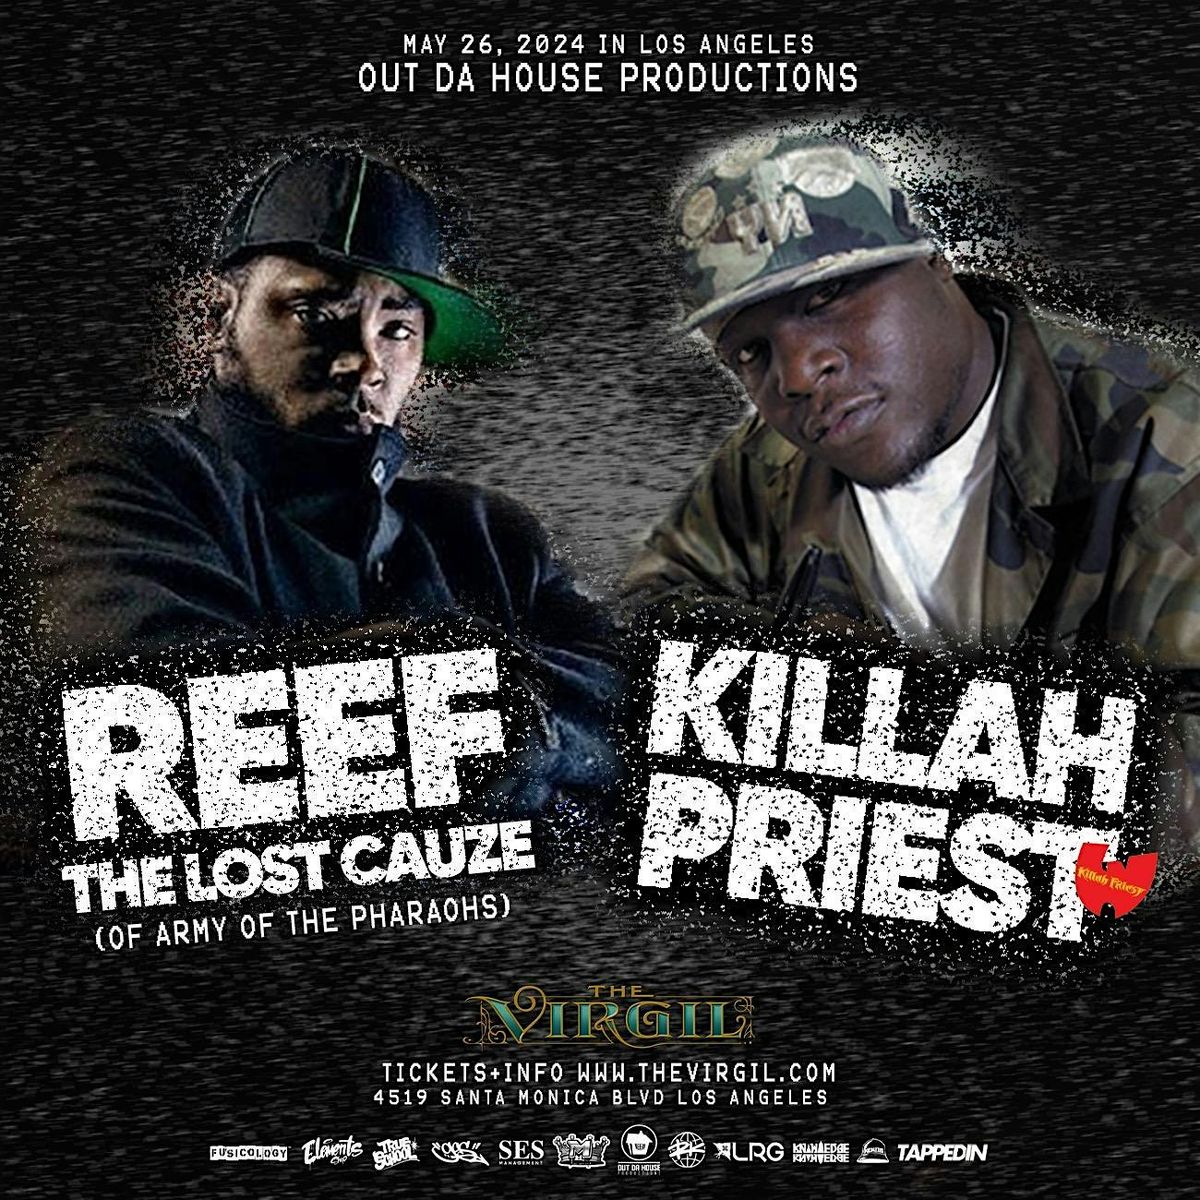 KILLAH PRIEST (of WU TANG) & REEF THE LOST CAUZE (of Army of The Pharaohs) LIVE at THE VIRGIL in LA